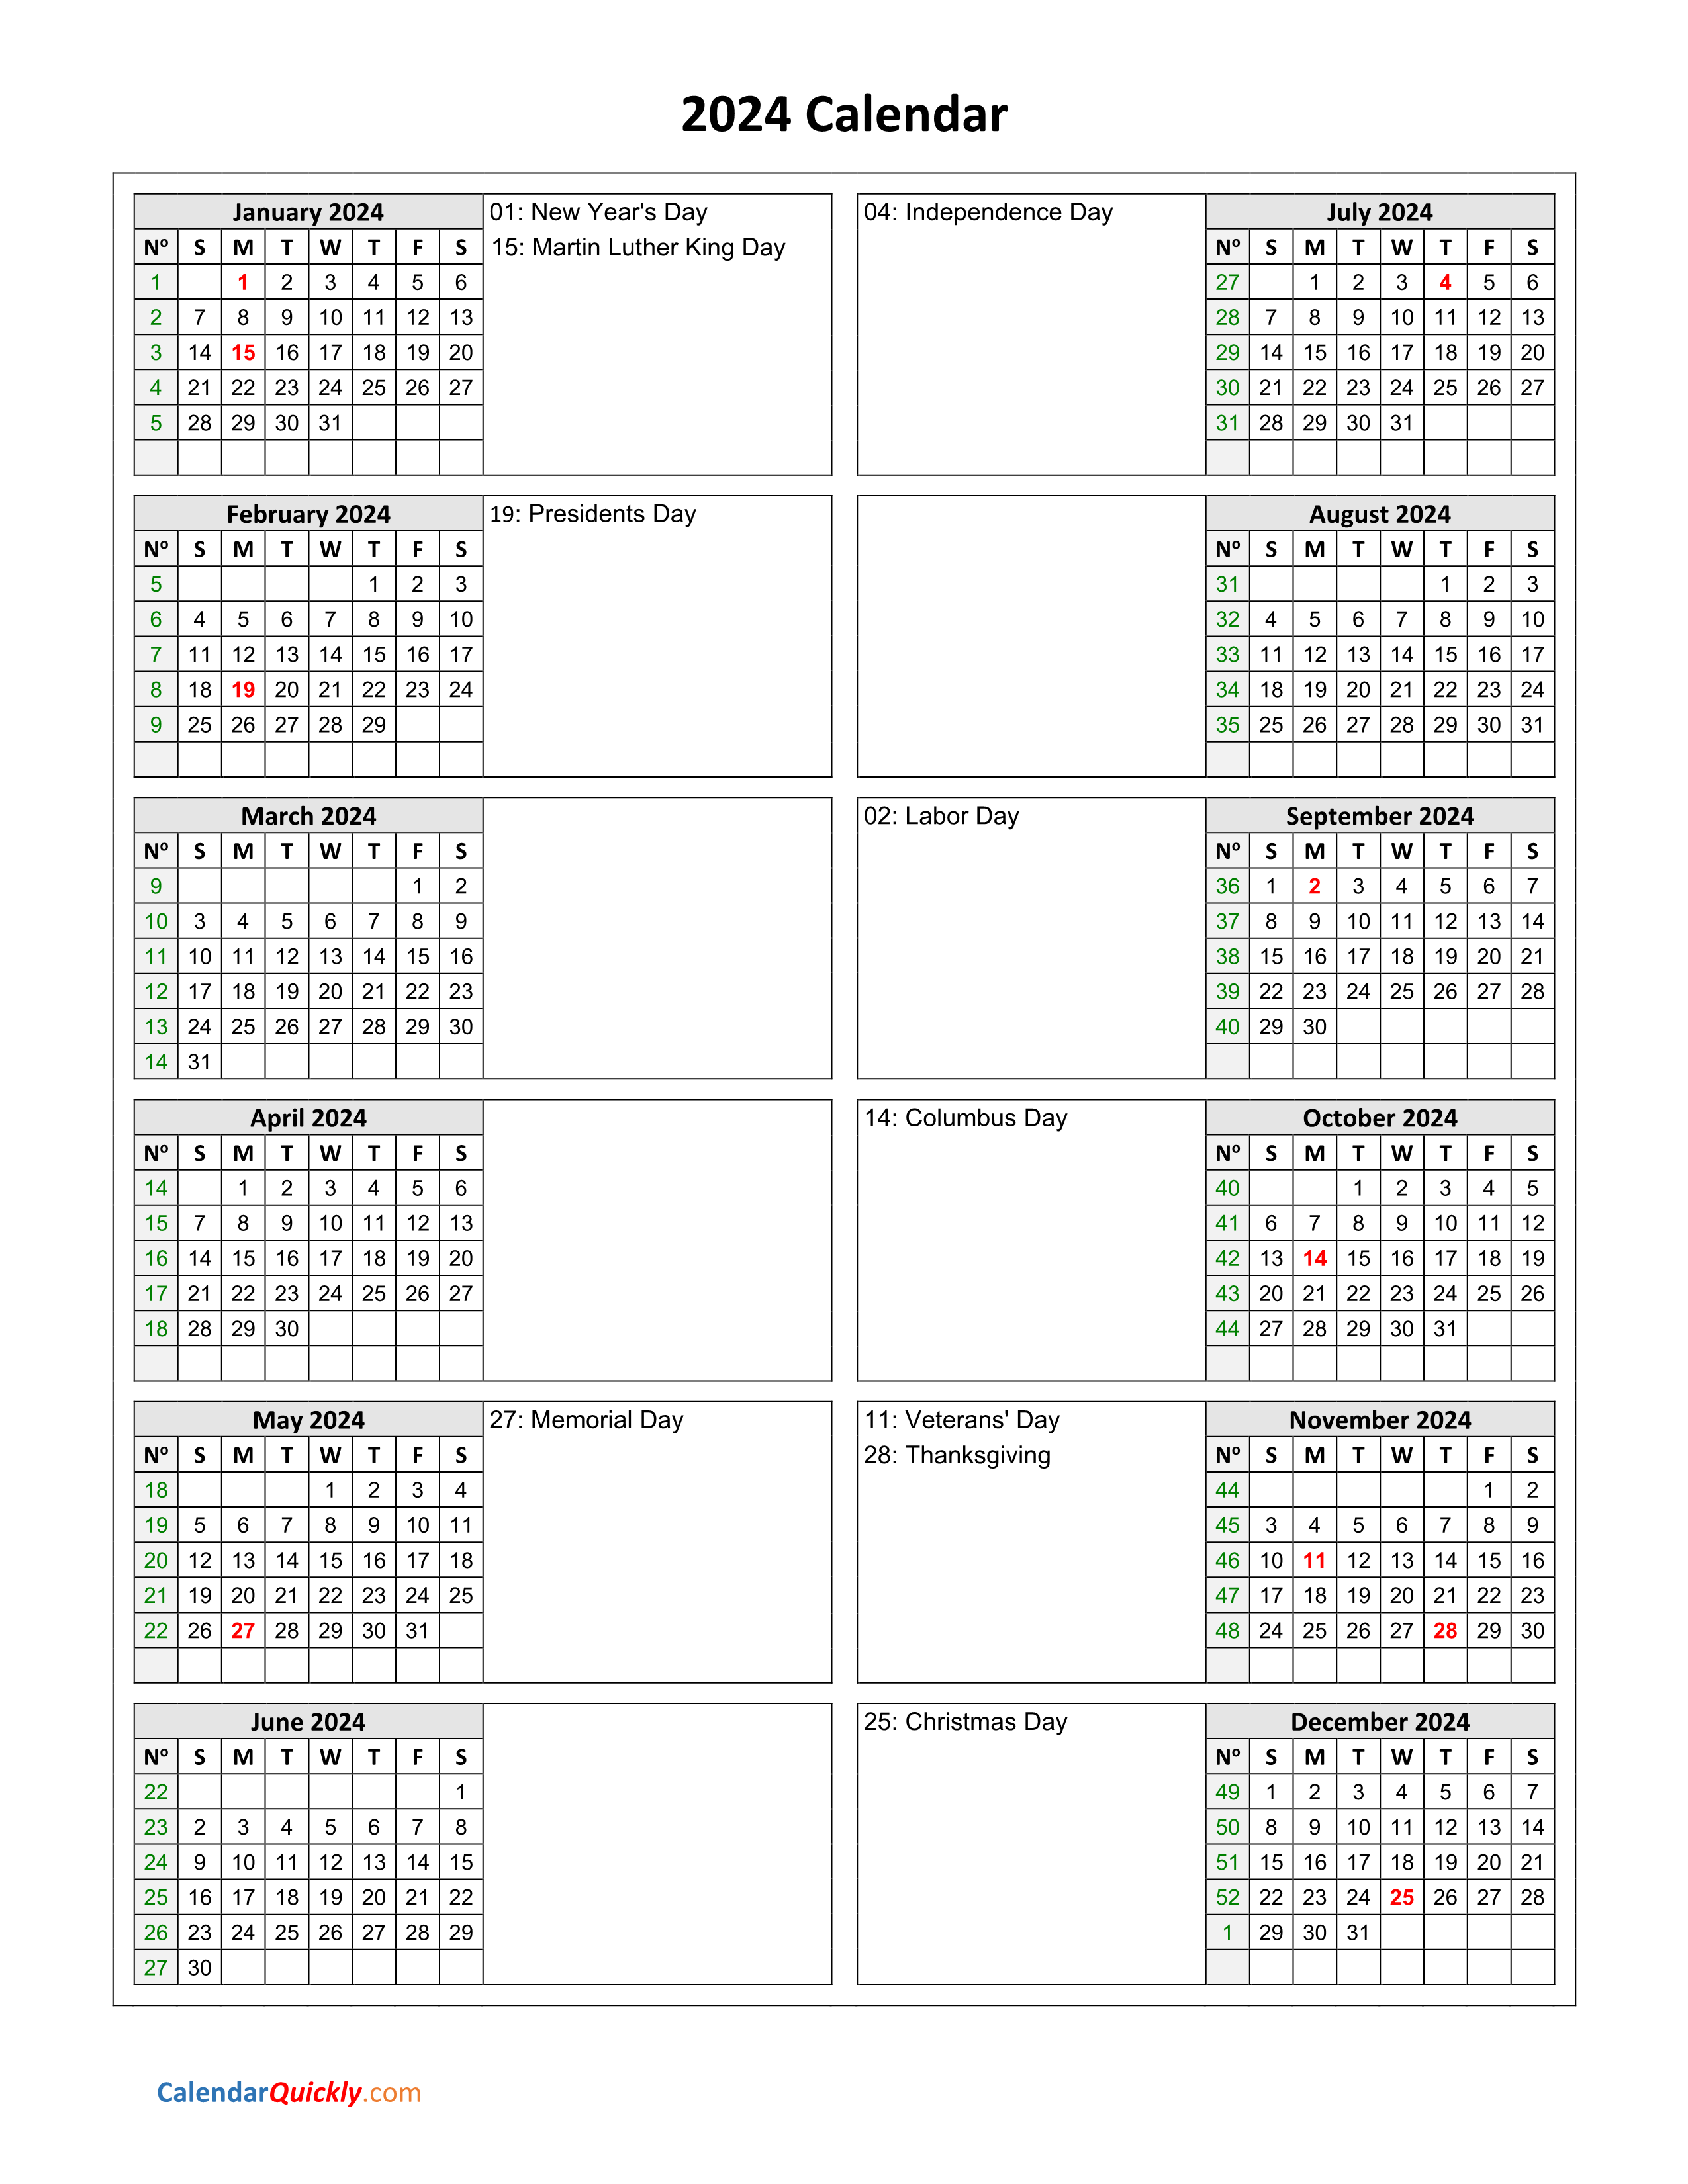 Printable Calendars 2024 Pdf Calendar 2024 With Federal Holidays - Free Printable 2024 Monthly Calendar With Holidays And Notes